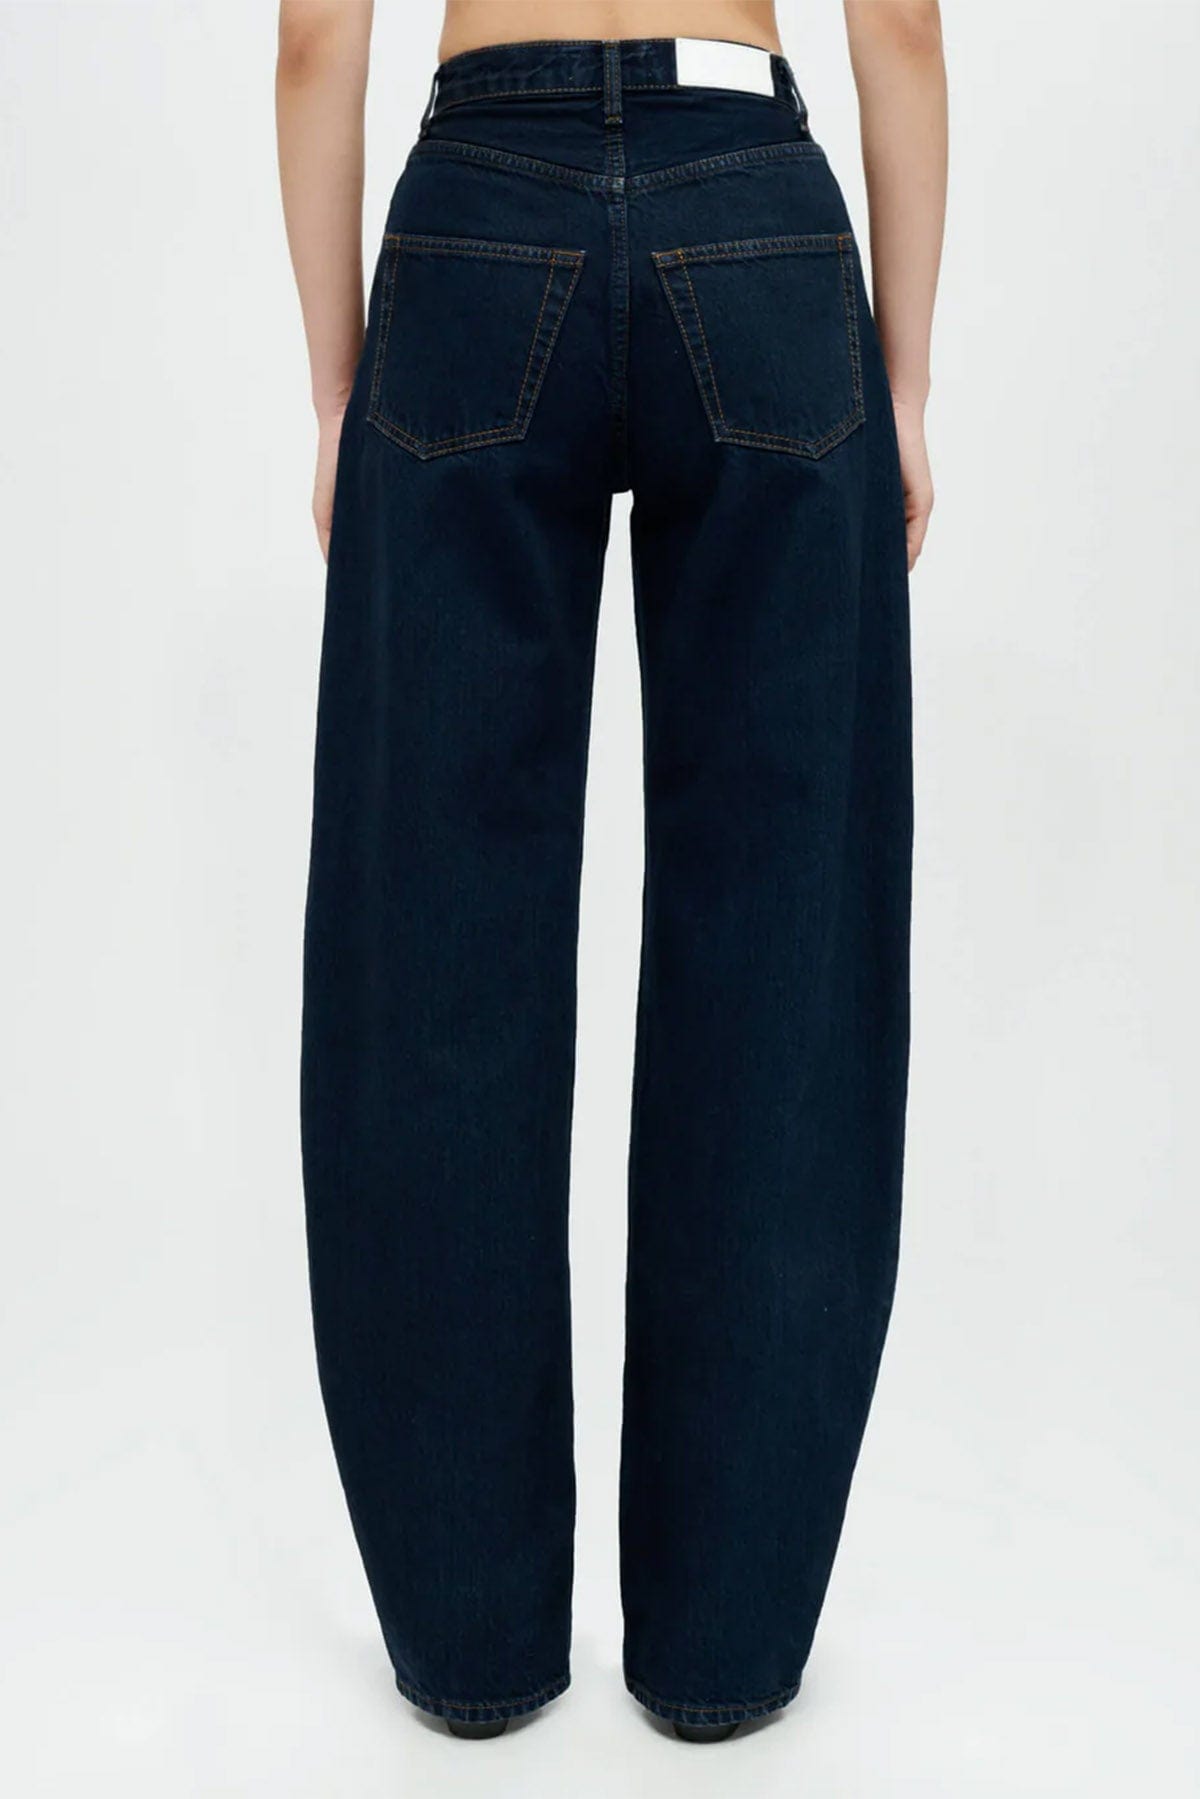 RE/DONE PANTALONE IN DENIM  Jeans Donna Re/Done Tailored Jean